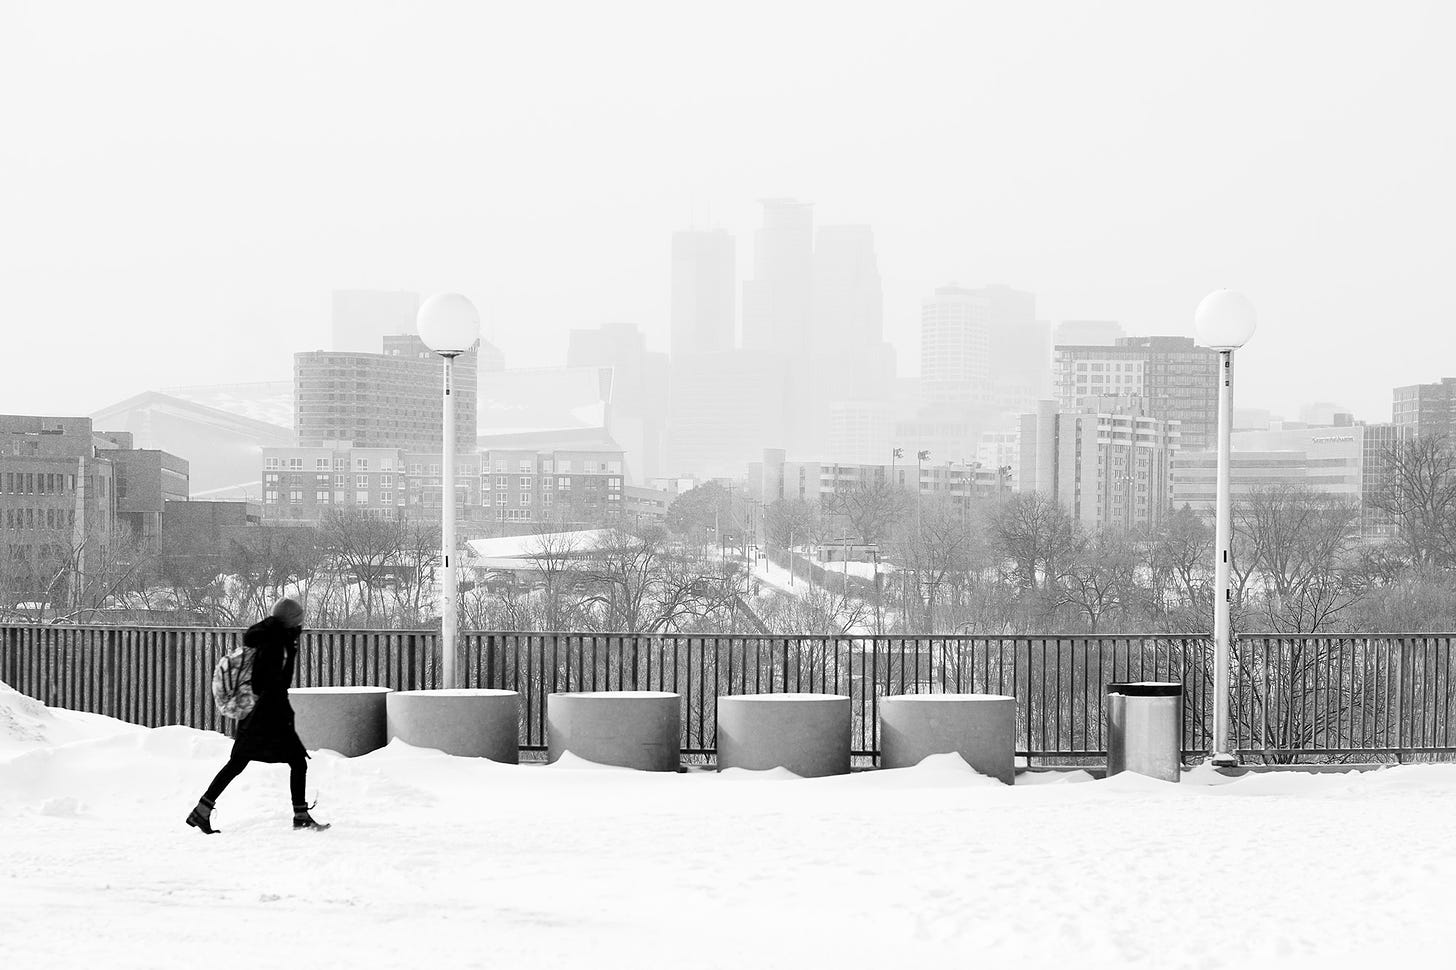 The skyline of downtown Minneapolis is obscured by snow.